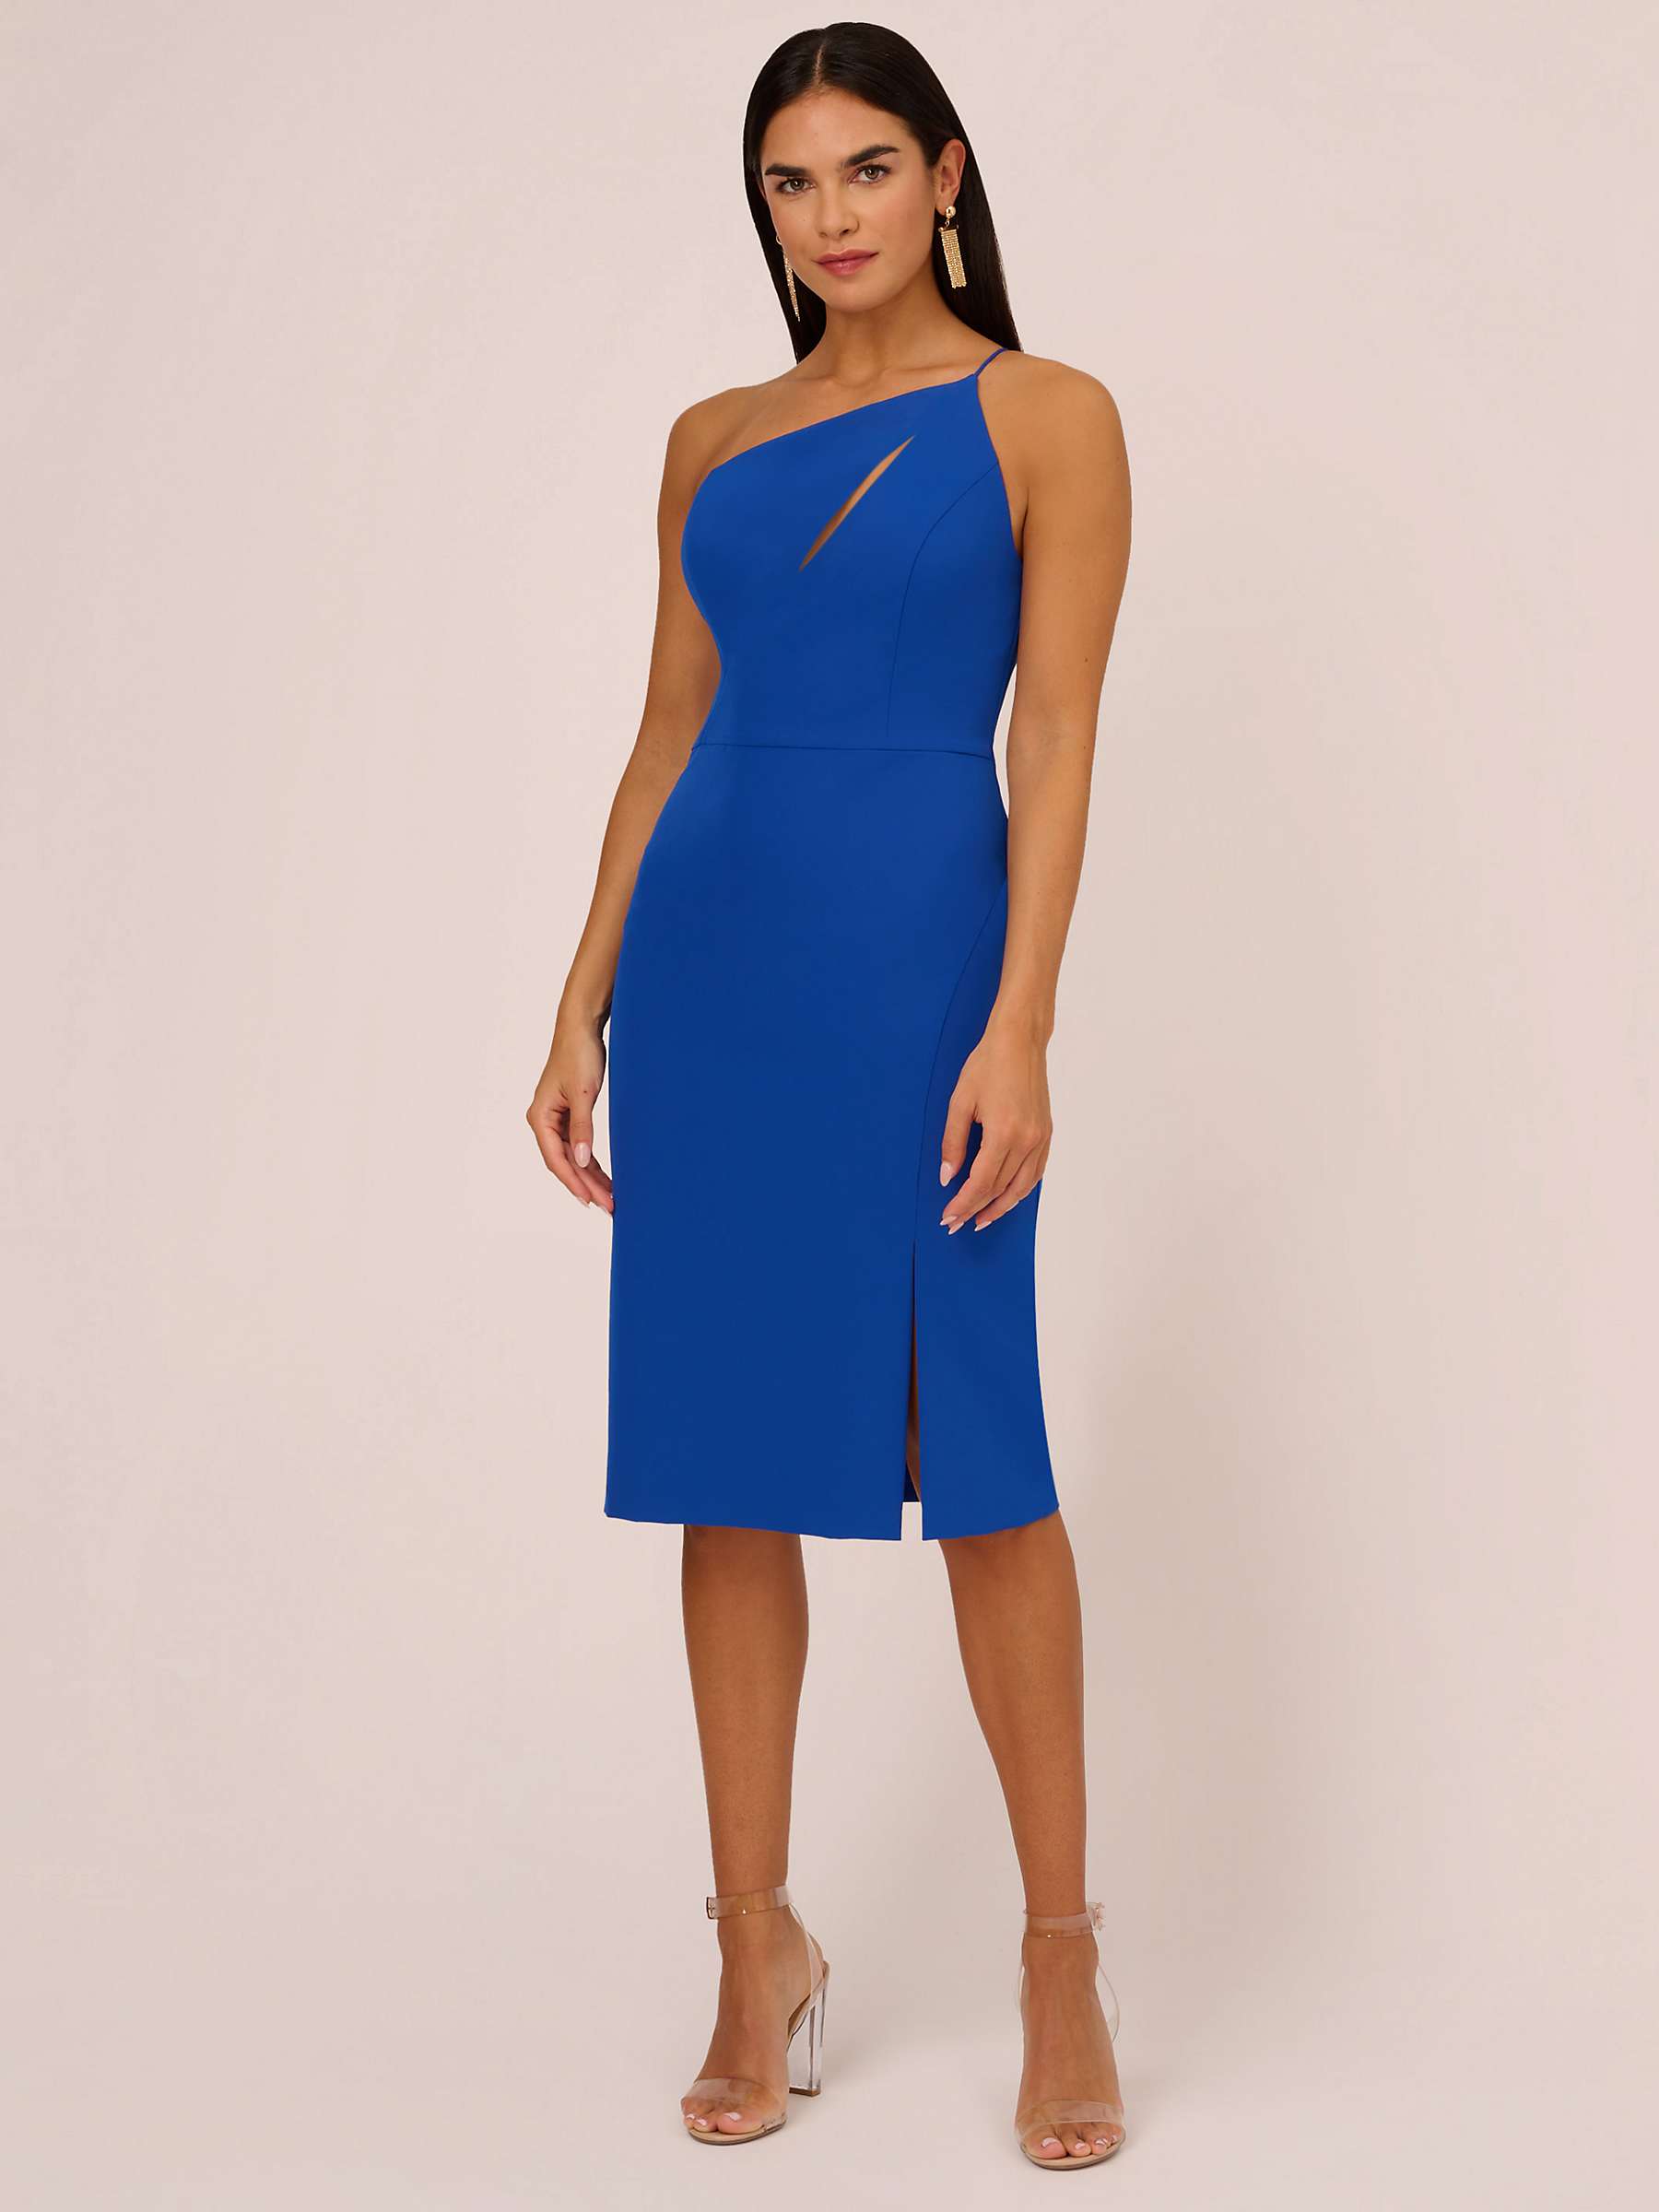 Buy Aidan by Adrianna Papell Knit Crepe On Shoulder Dress, Royal Sapphire Online at johnlewis.com